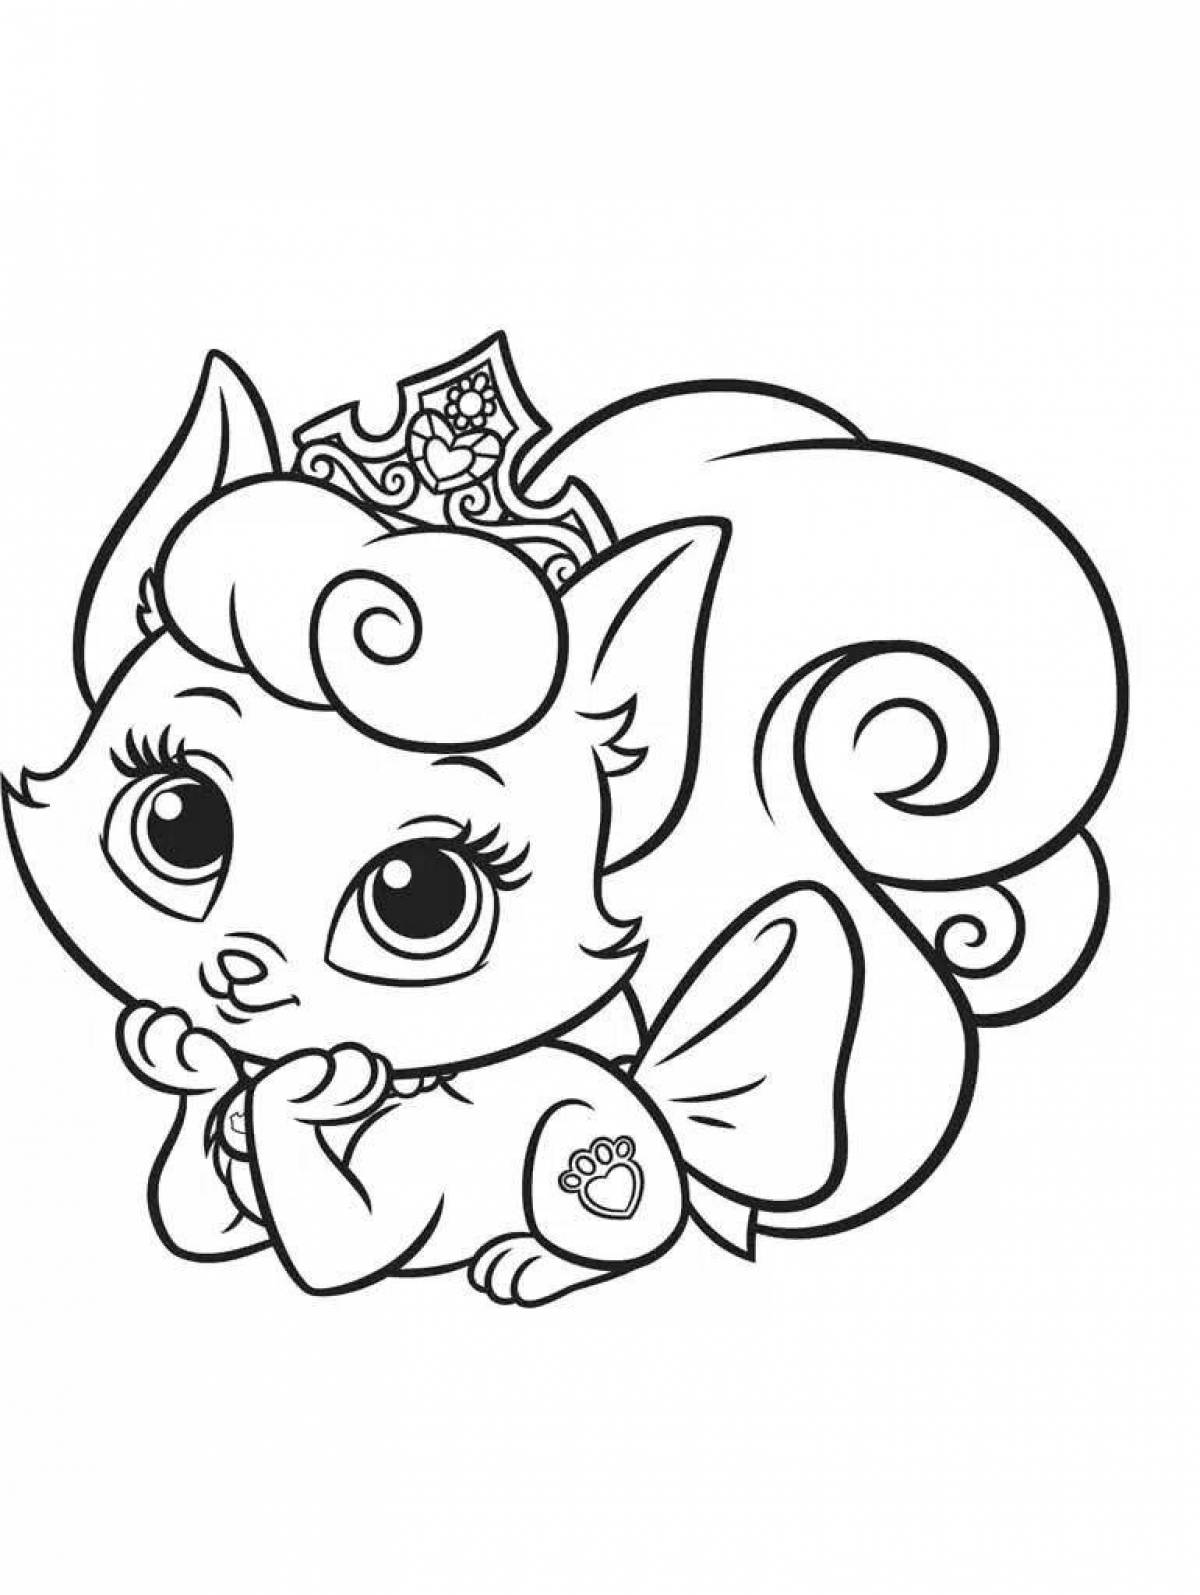 Coloring book exquisite cat with a crown